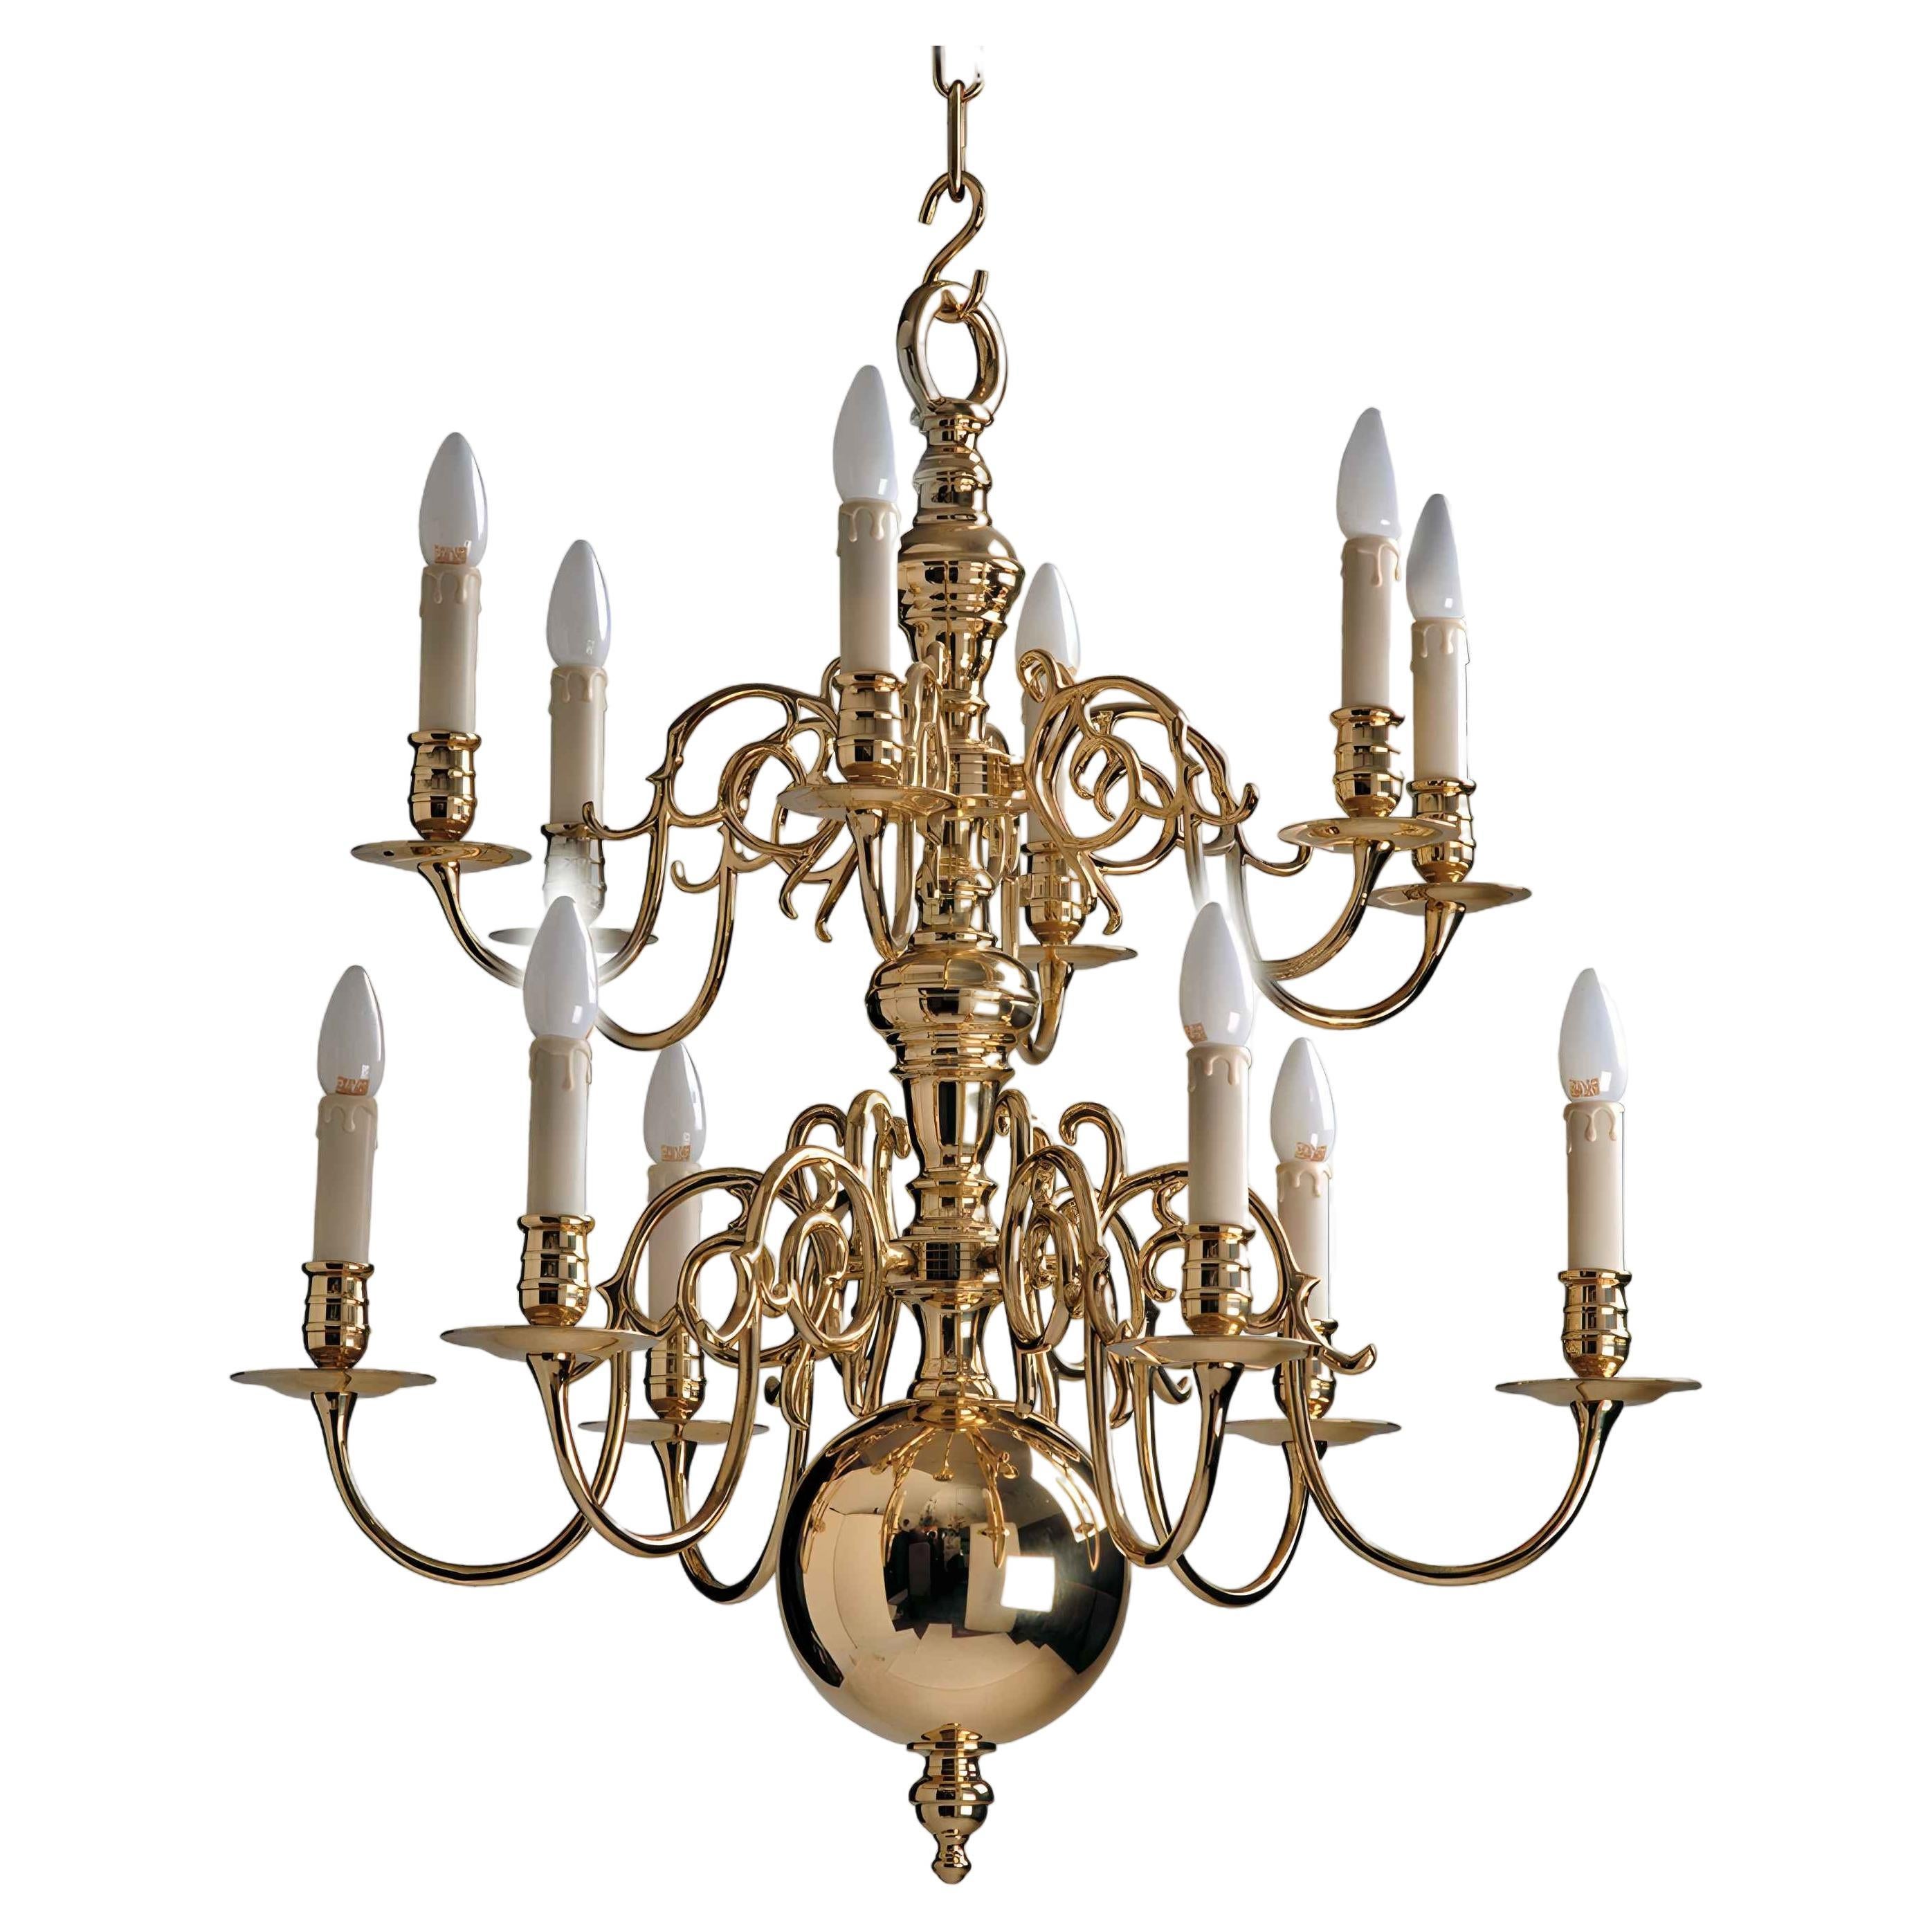 2 Tier 17th Century Electric Model Dutch Brass Chandelier with 12 Lights H85xW74 For Sale